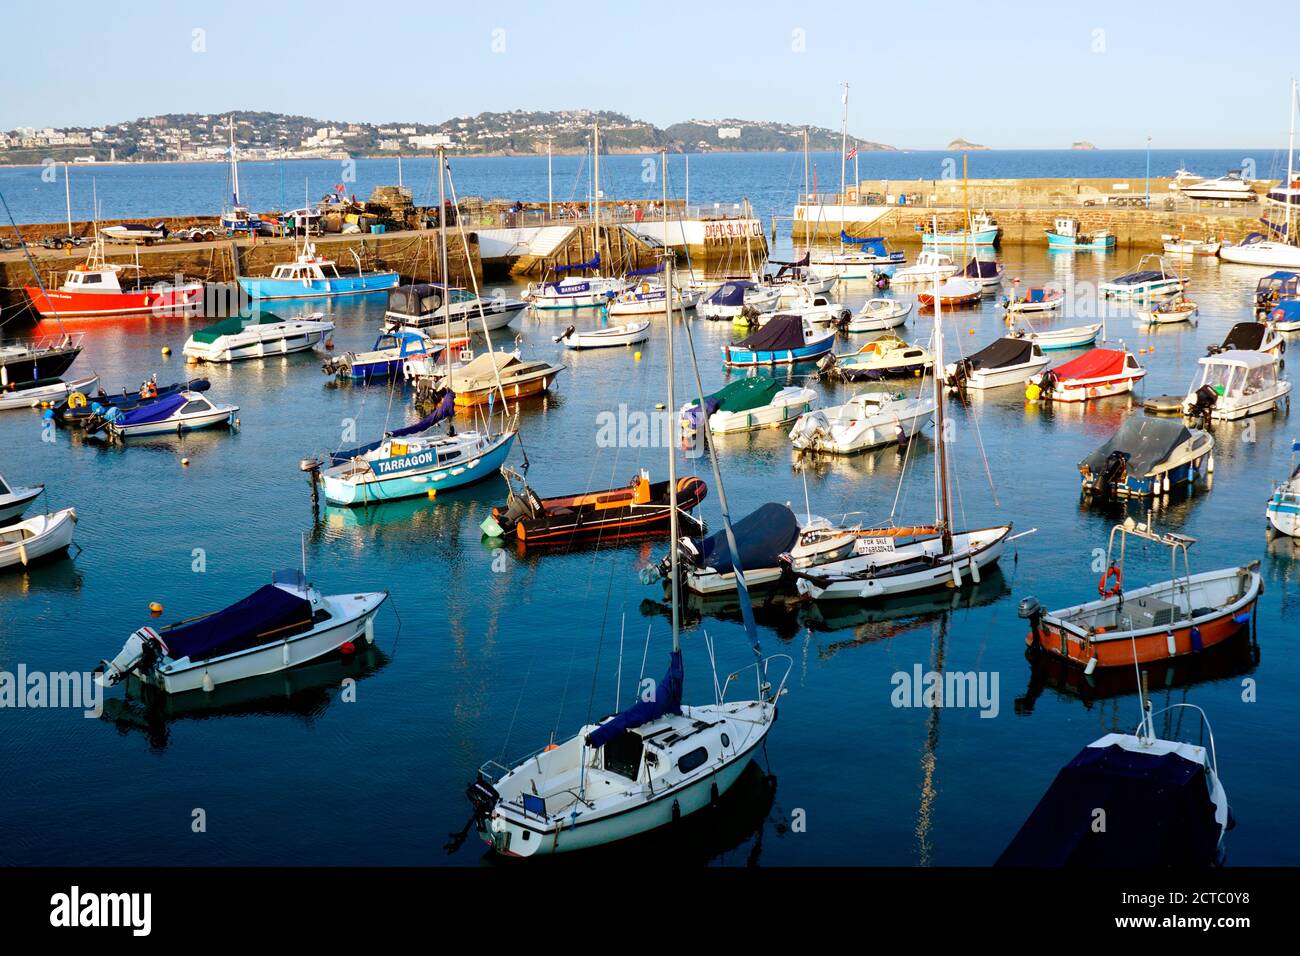 Paignton, Devon, UK. September 13, 2020. Torbay and harbour in the evening sunshine at Paignton in Devon, UK. Stock Photo